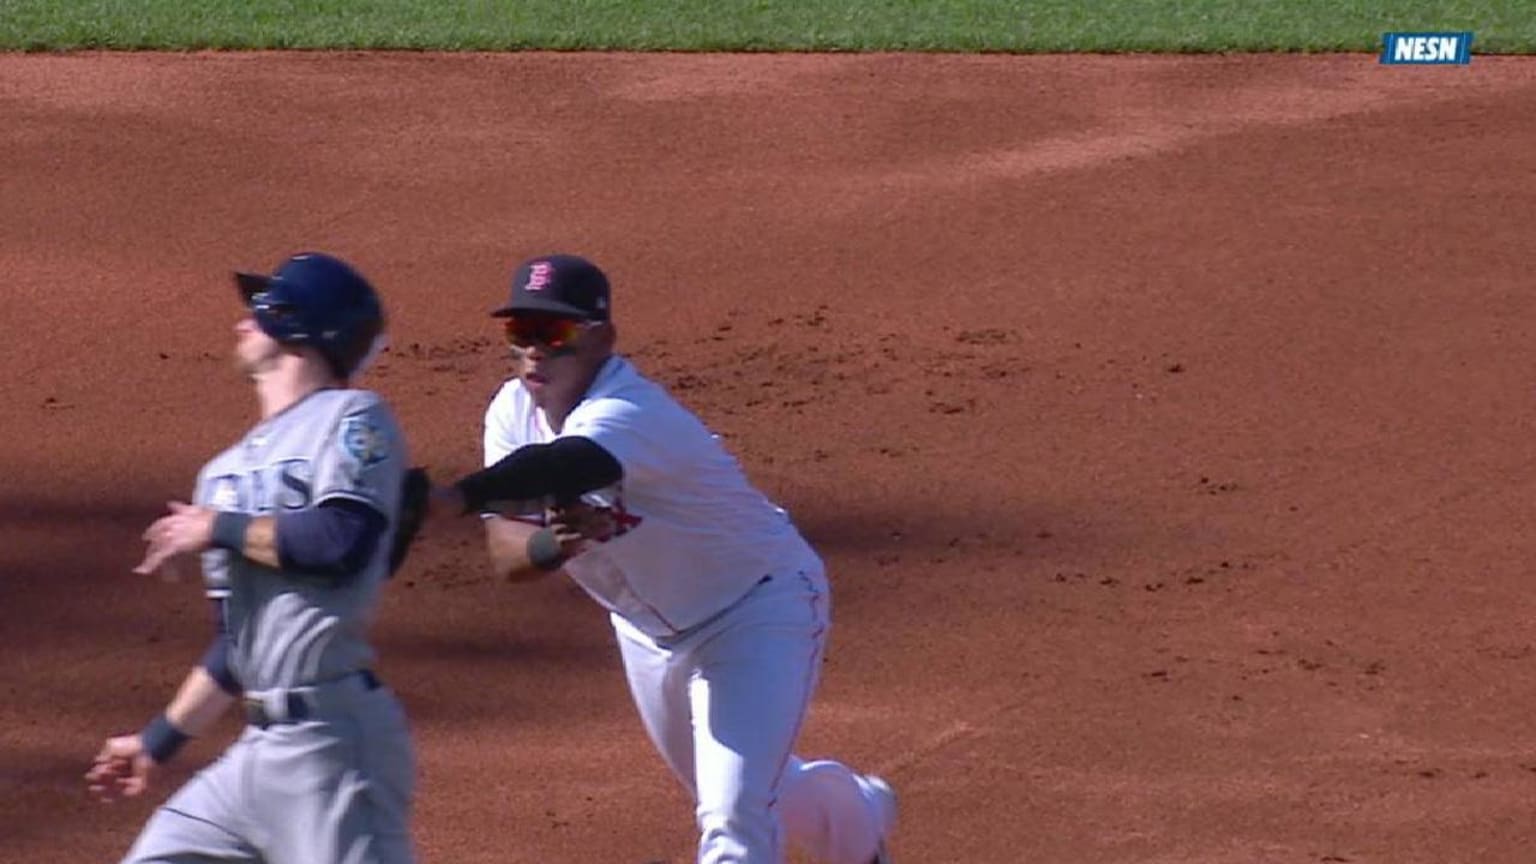 Ozzie jumps over runner to turn double play 